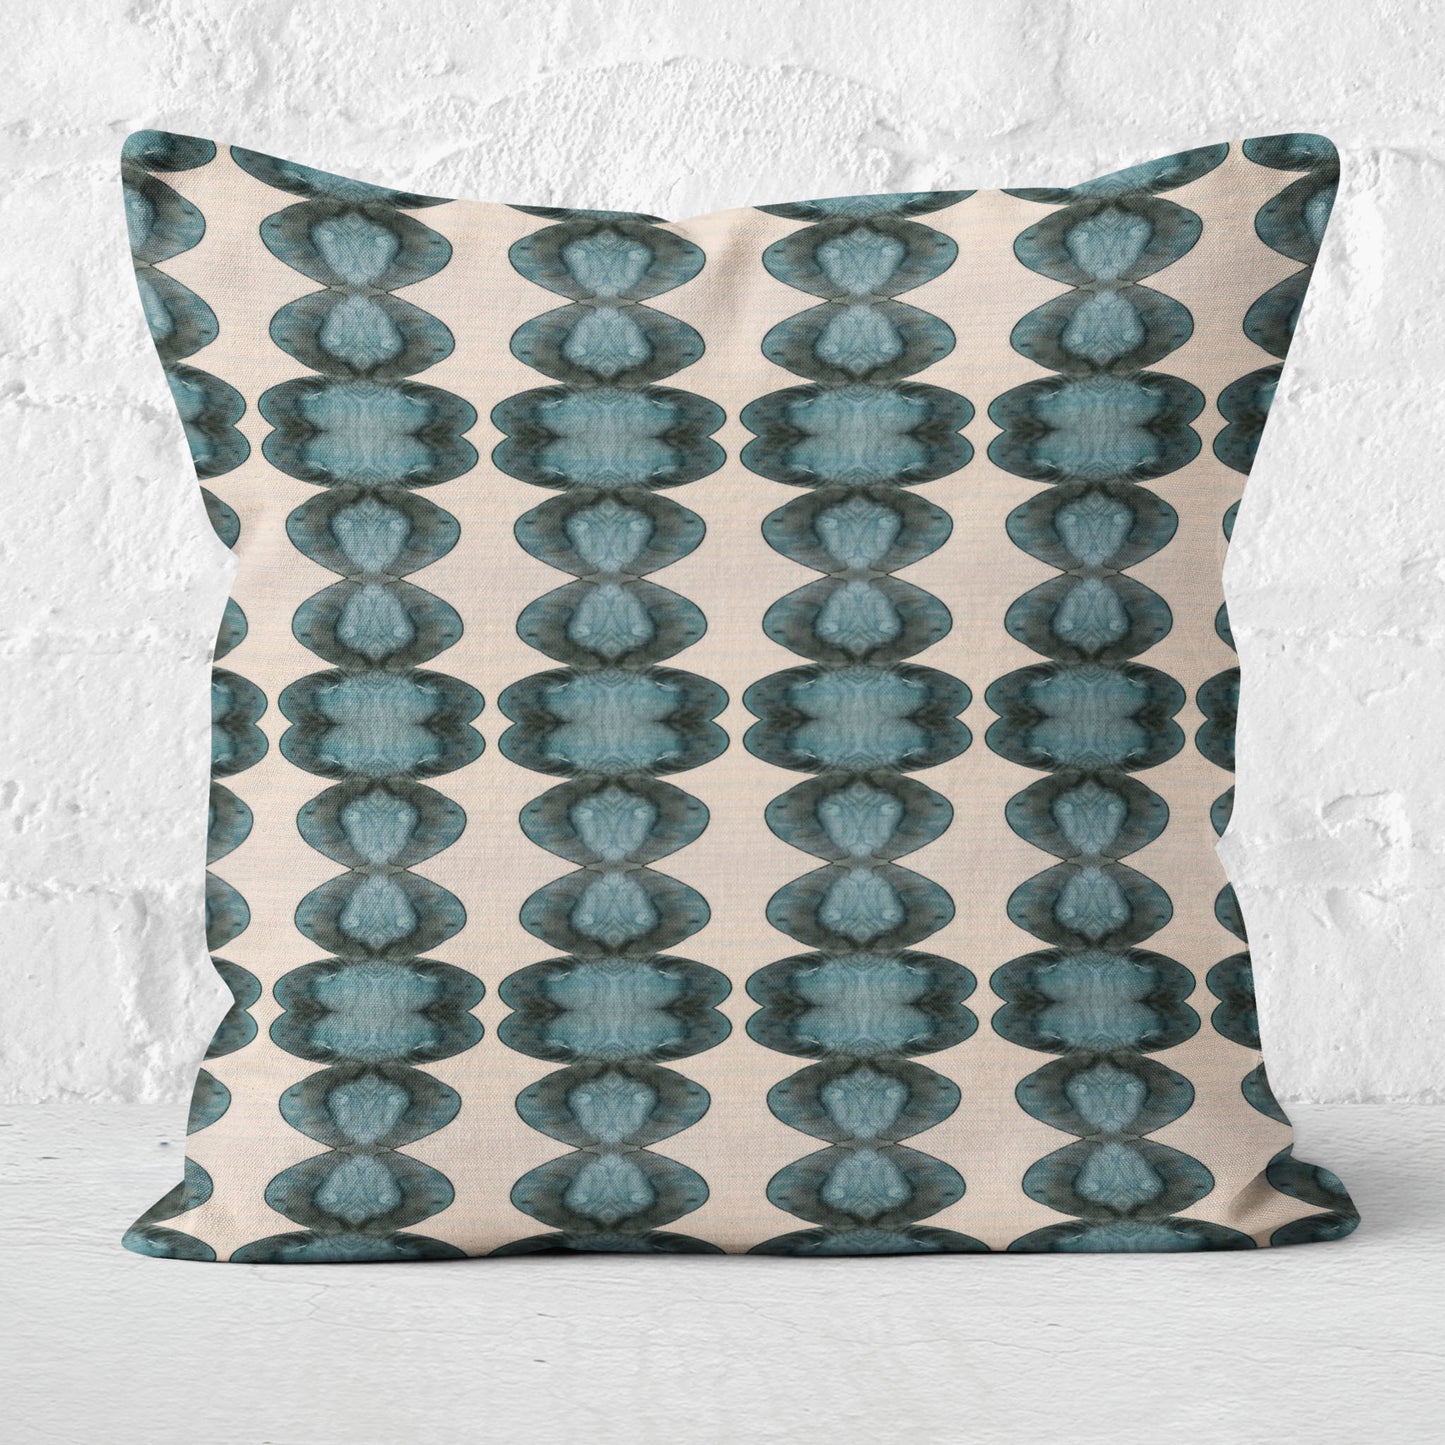 Baubles Throw Pillow Cover